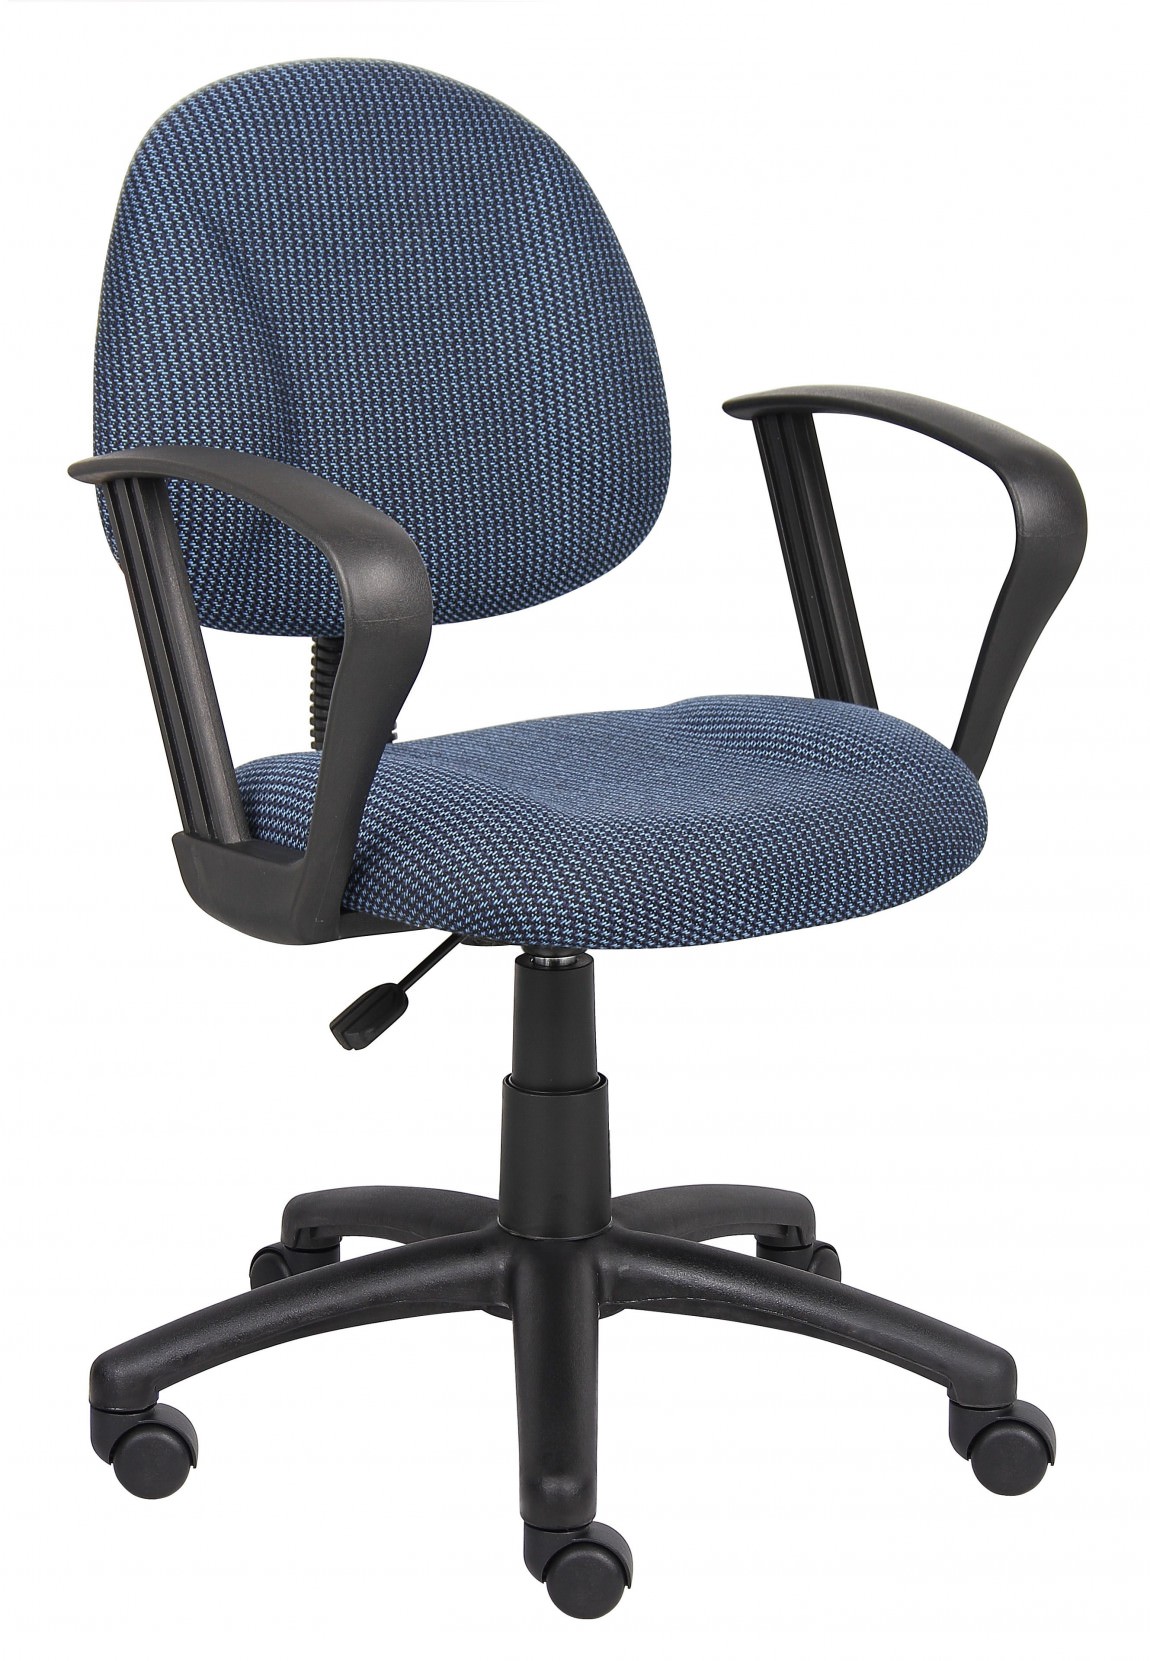 https://madisonliquidators.com/images/p/1150/19428-low-back-office-chair-with-arms-1.jpg